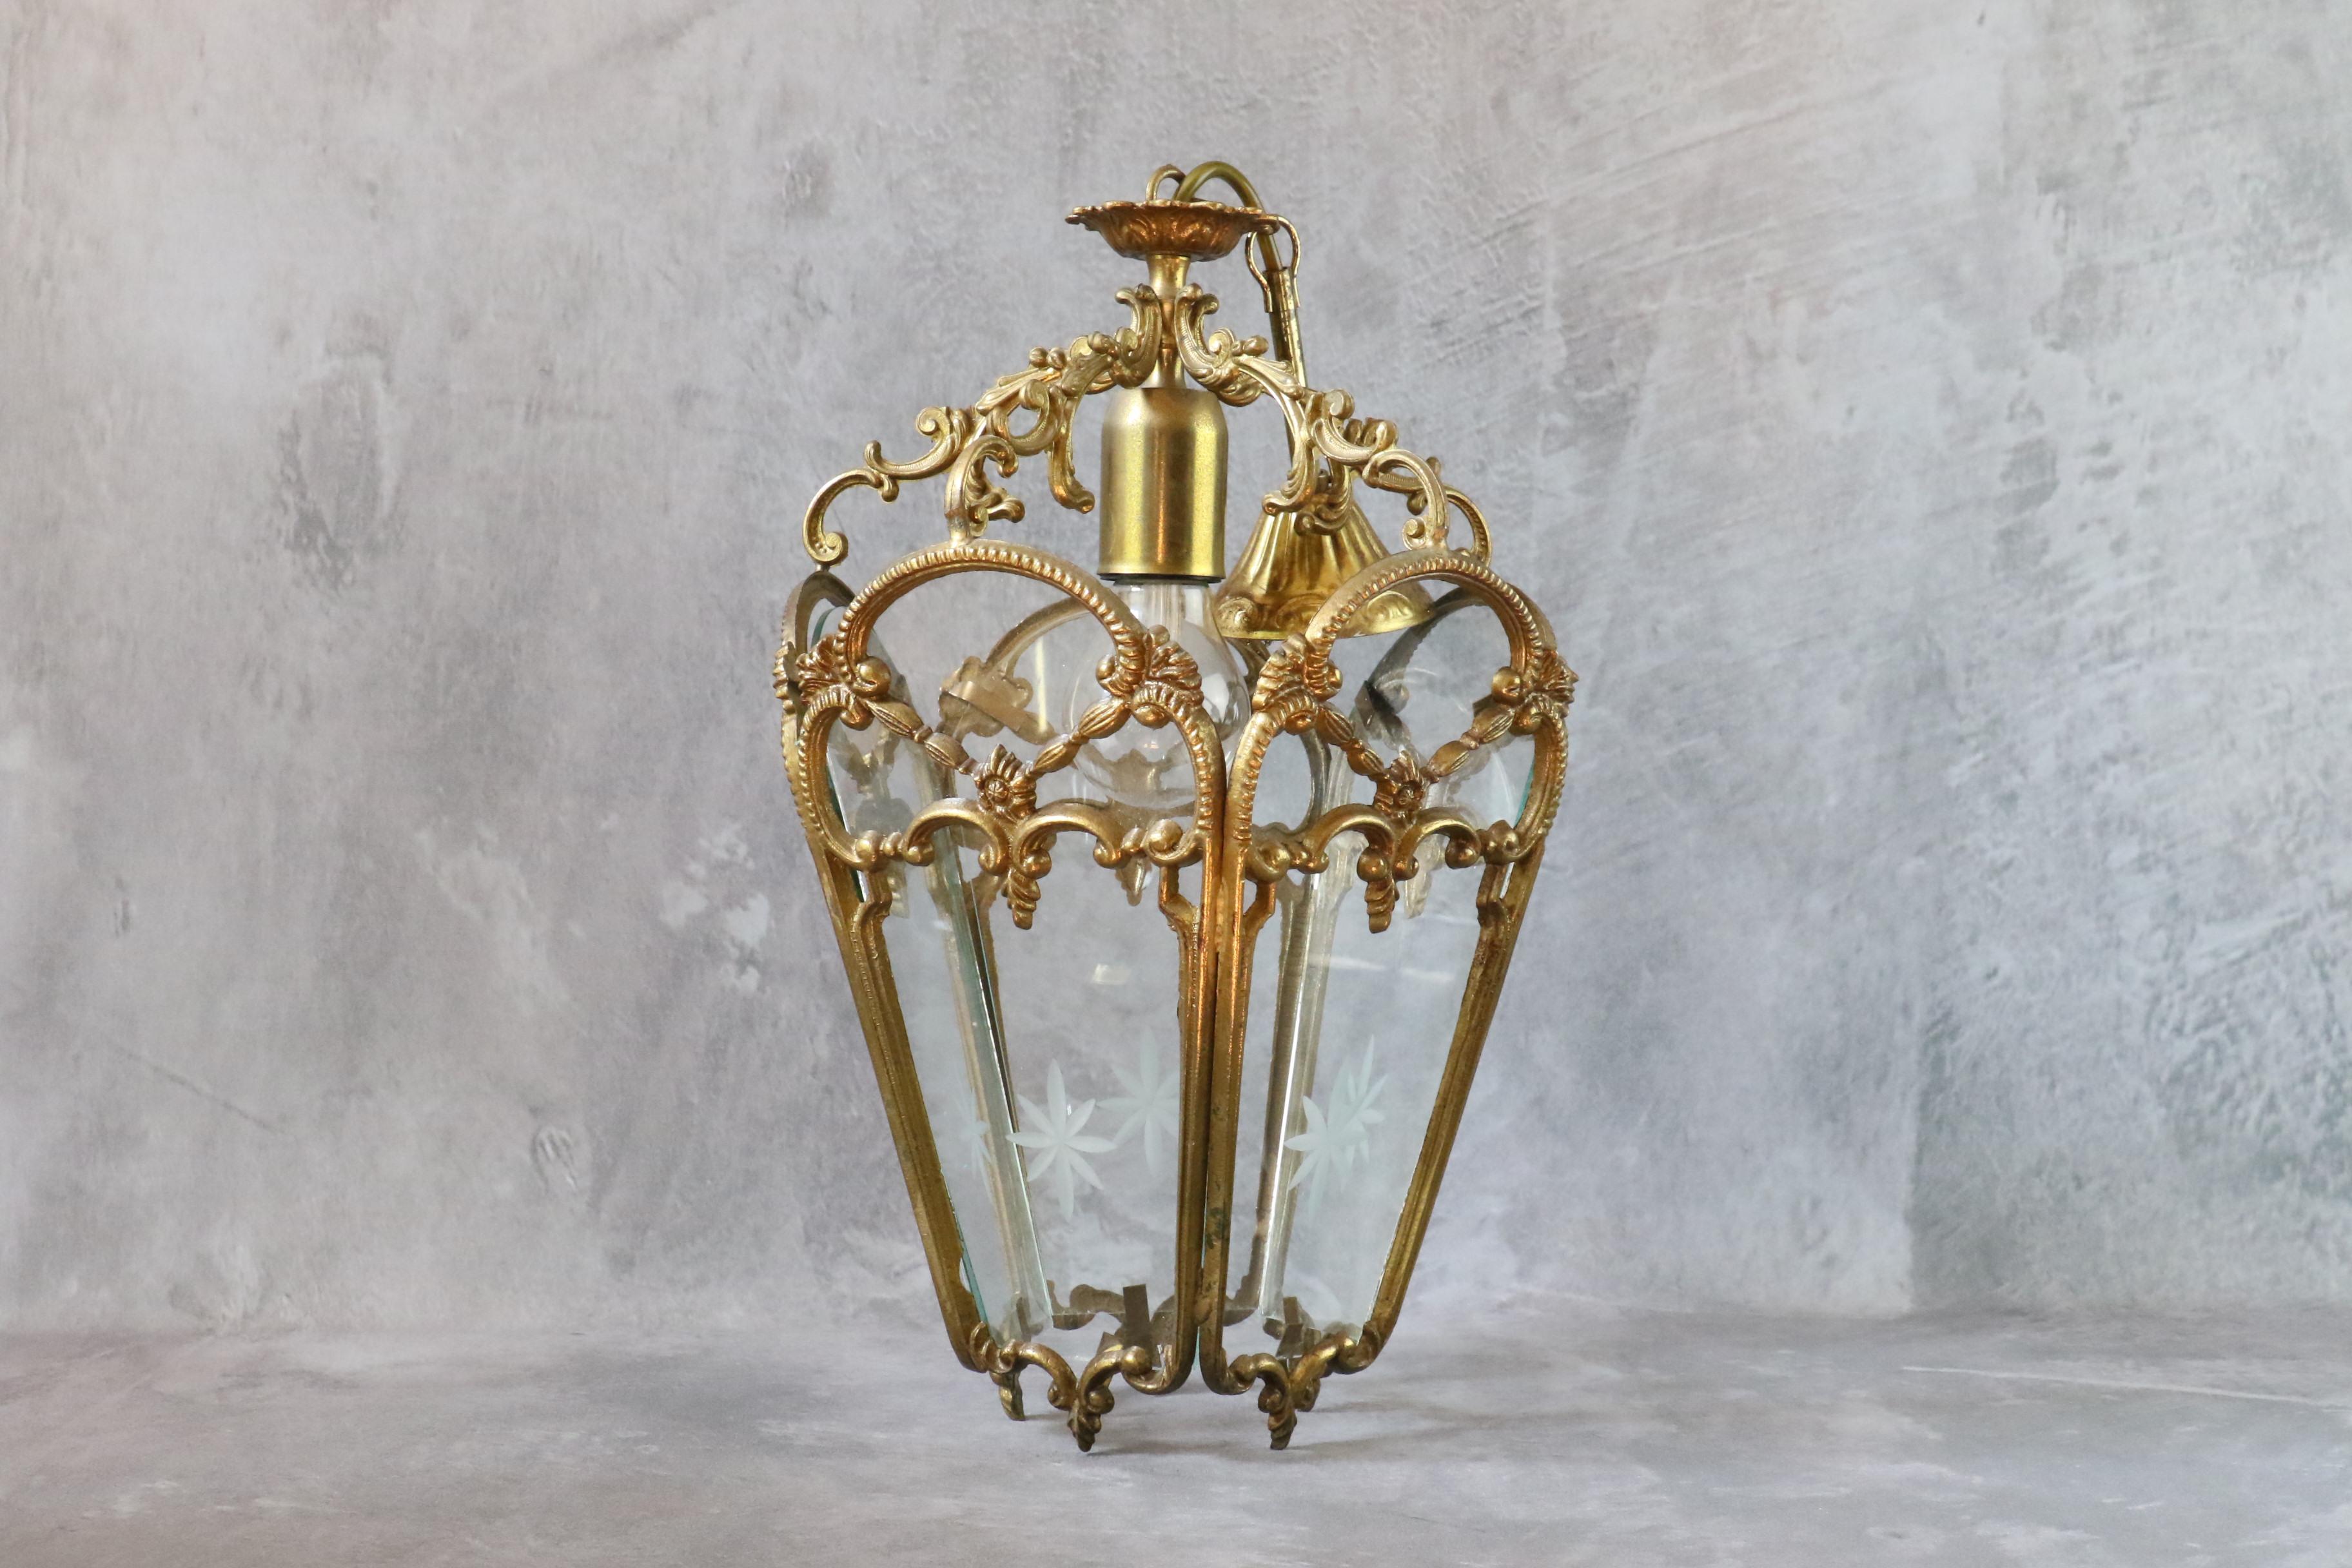 Mid-century large bronze lantern pendant, Louis XV style. 

It has 5 cut glass panels with a cut star motif and beautifully decorated bronze. 
The lantern is in very good condition, aged patina on the bronze.

Lights: One socket for one E27